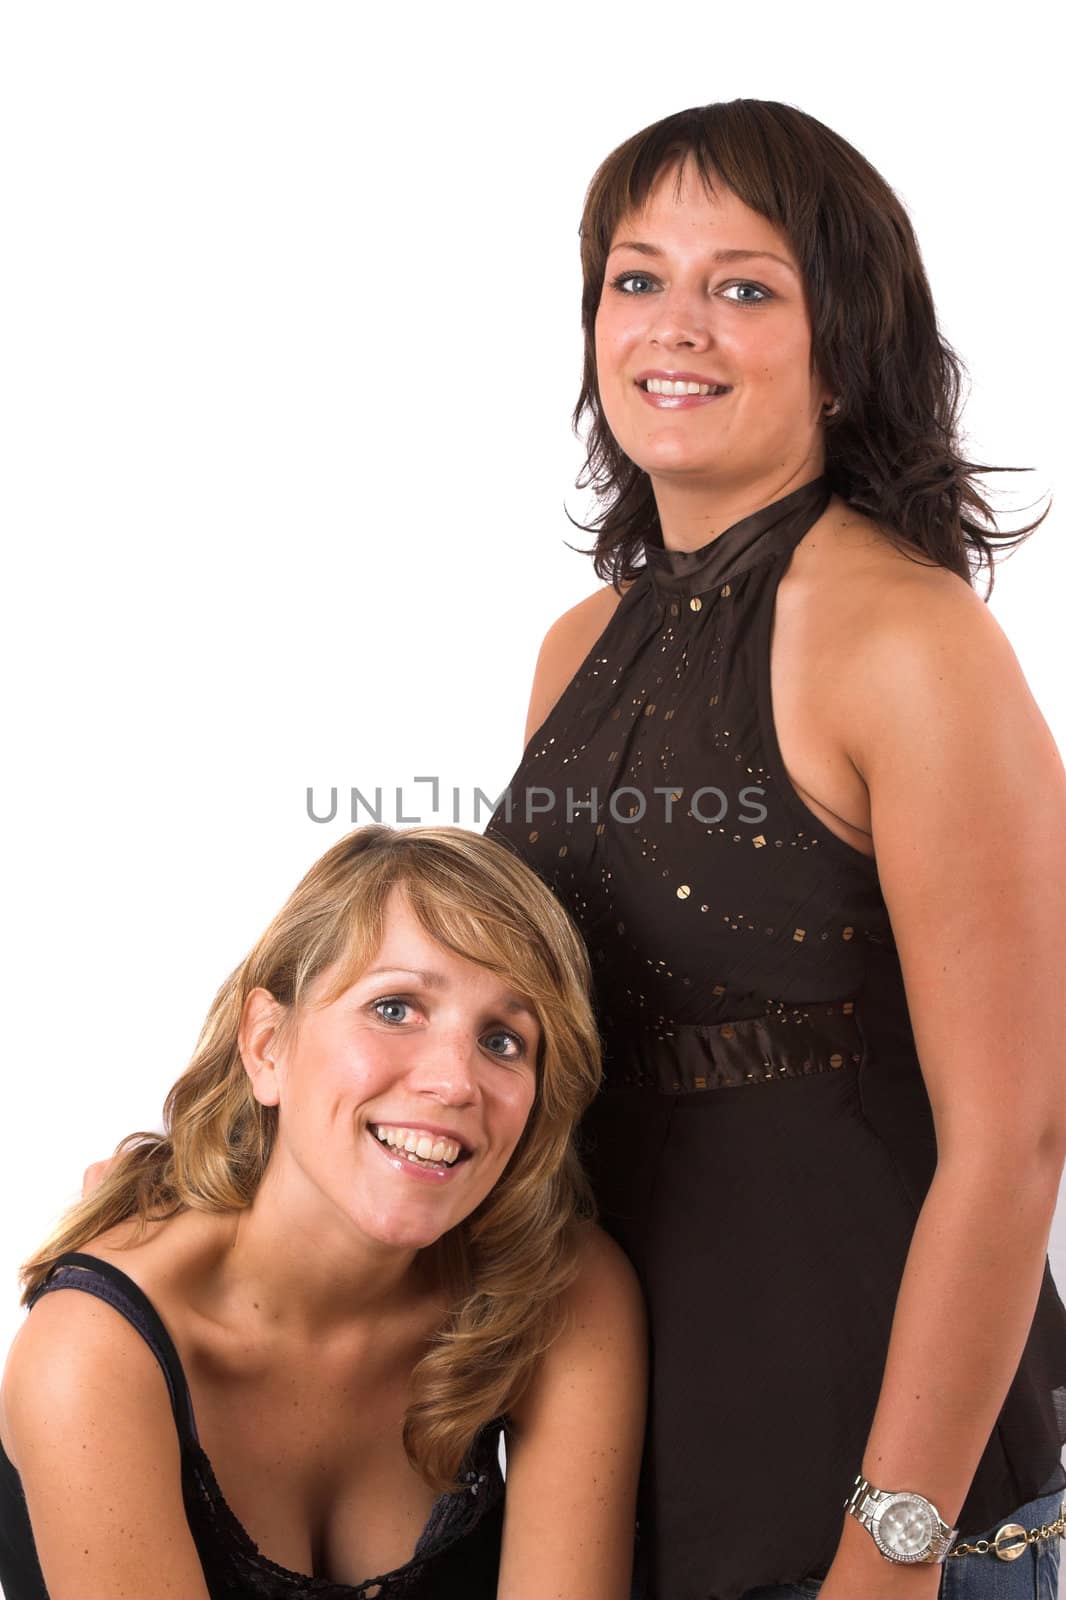 Two pretty sisters posing together on white background